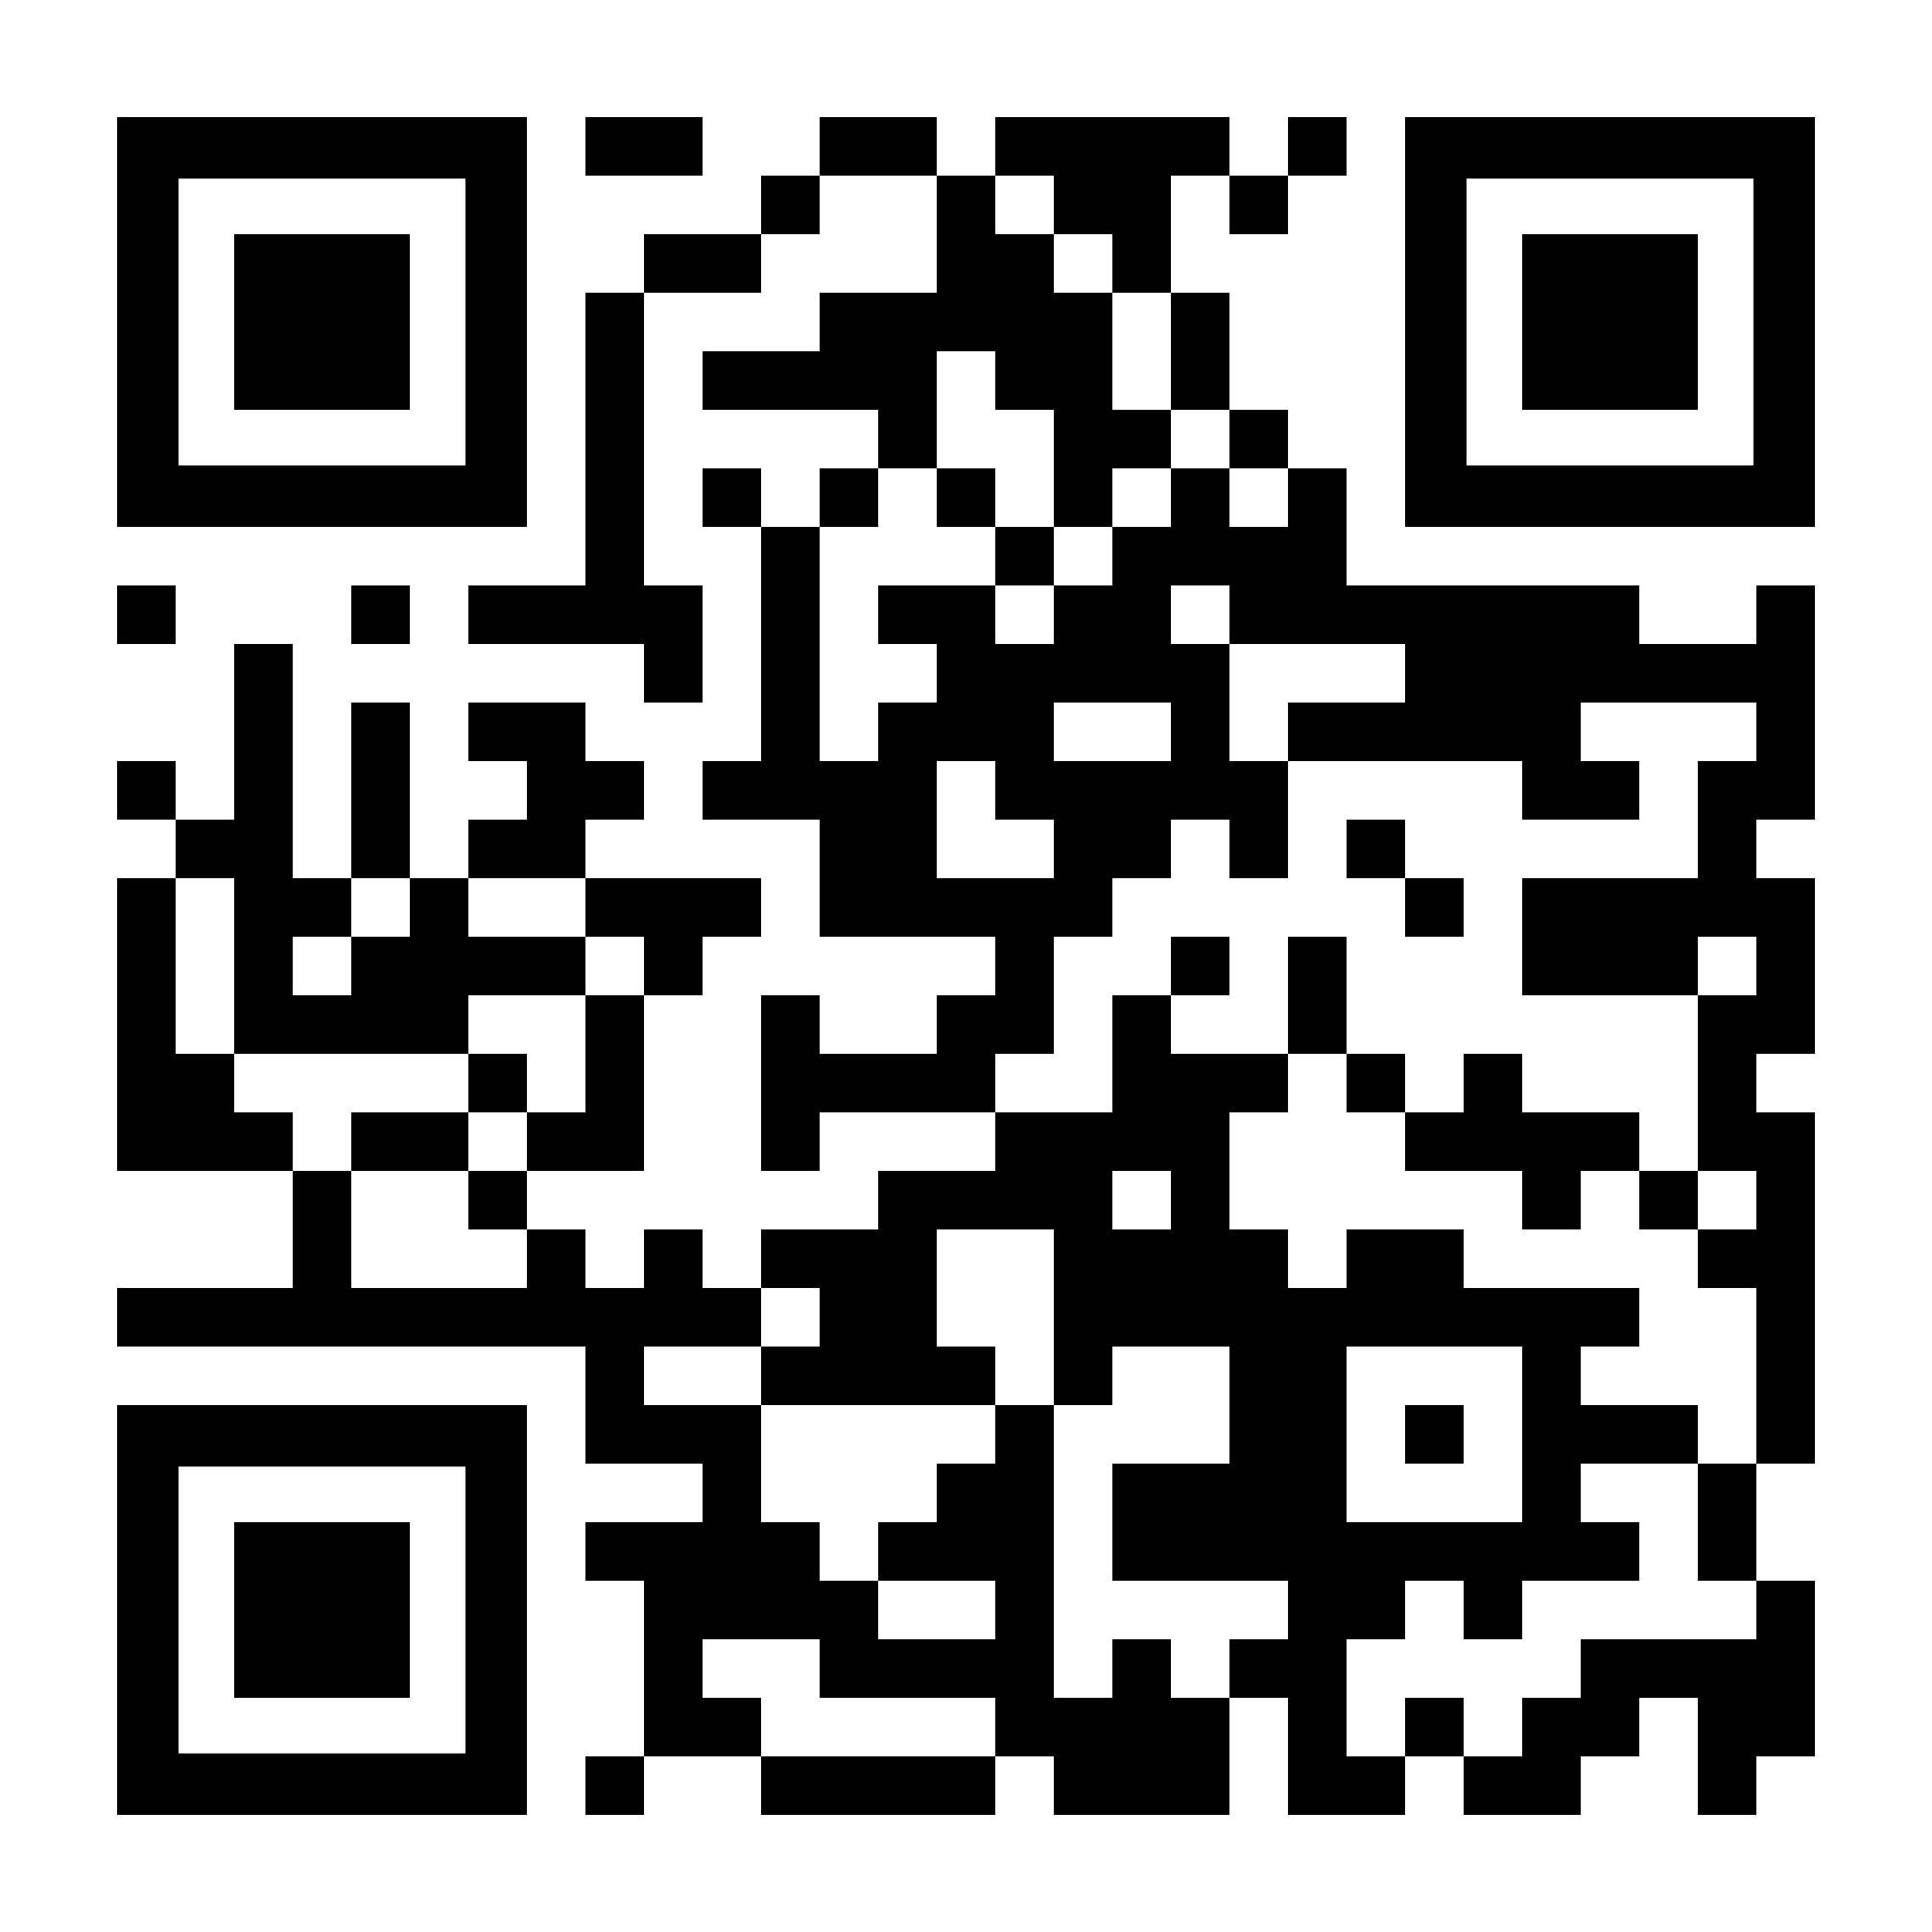 QR Code to install Columbus 3-1-1 on your device.